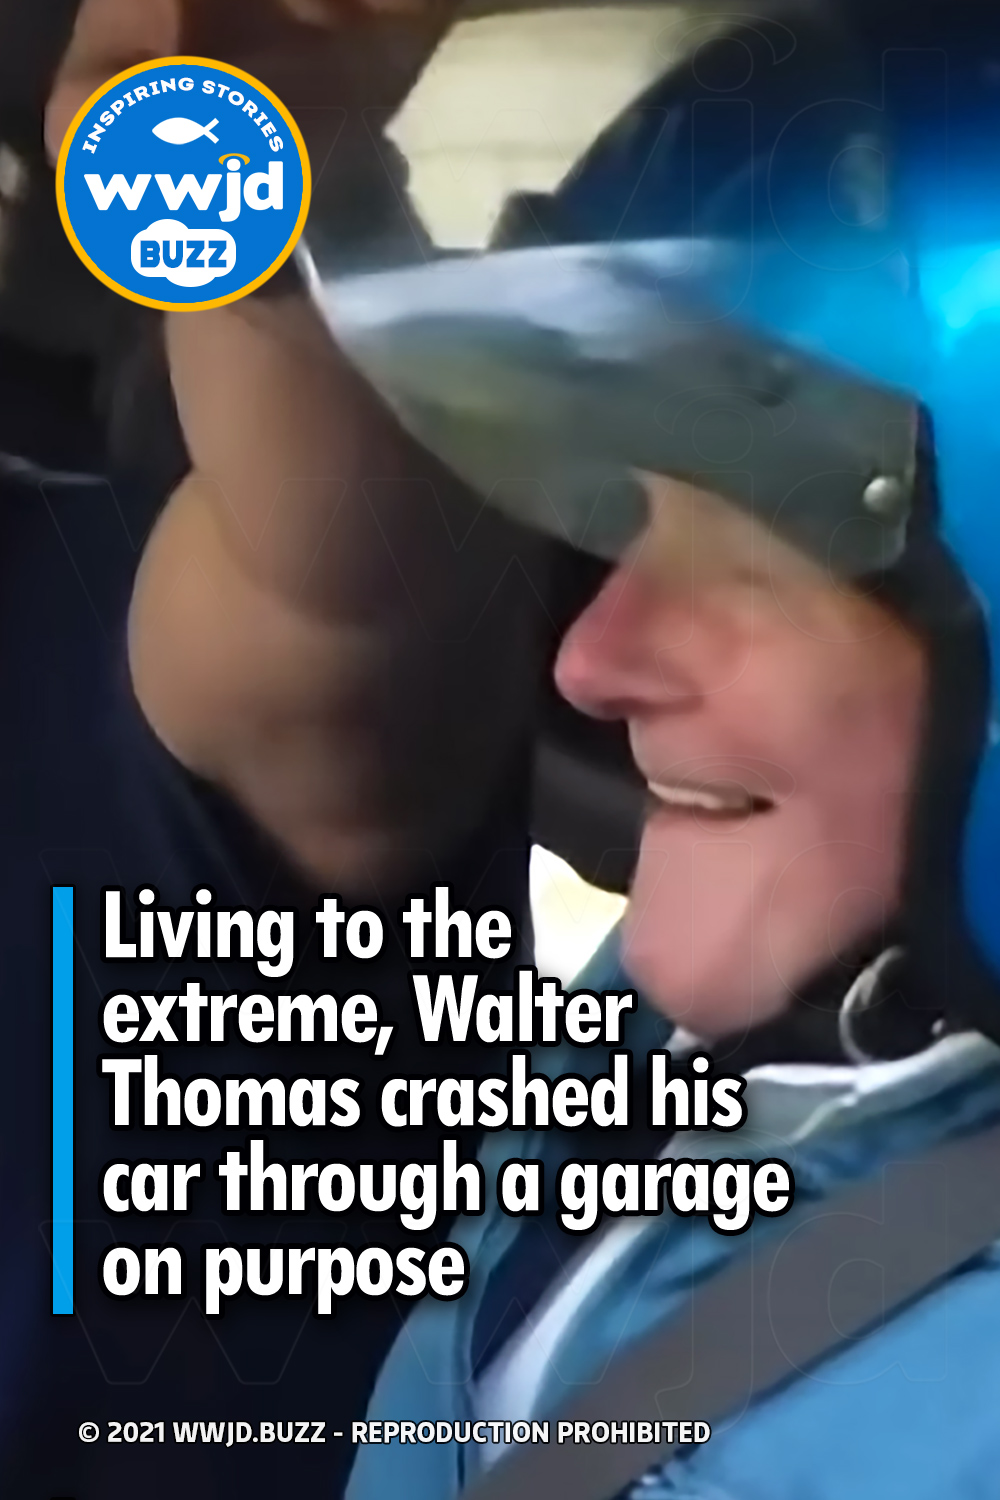 Living to the extreme, Walter Thomas crashed his car through a garage on purpose